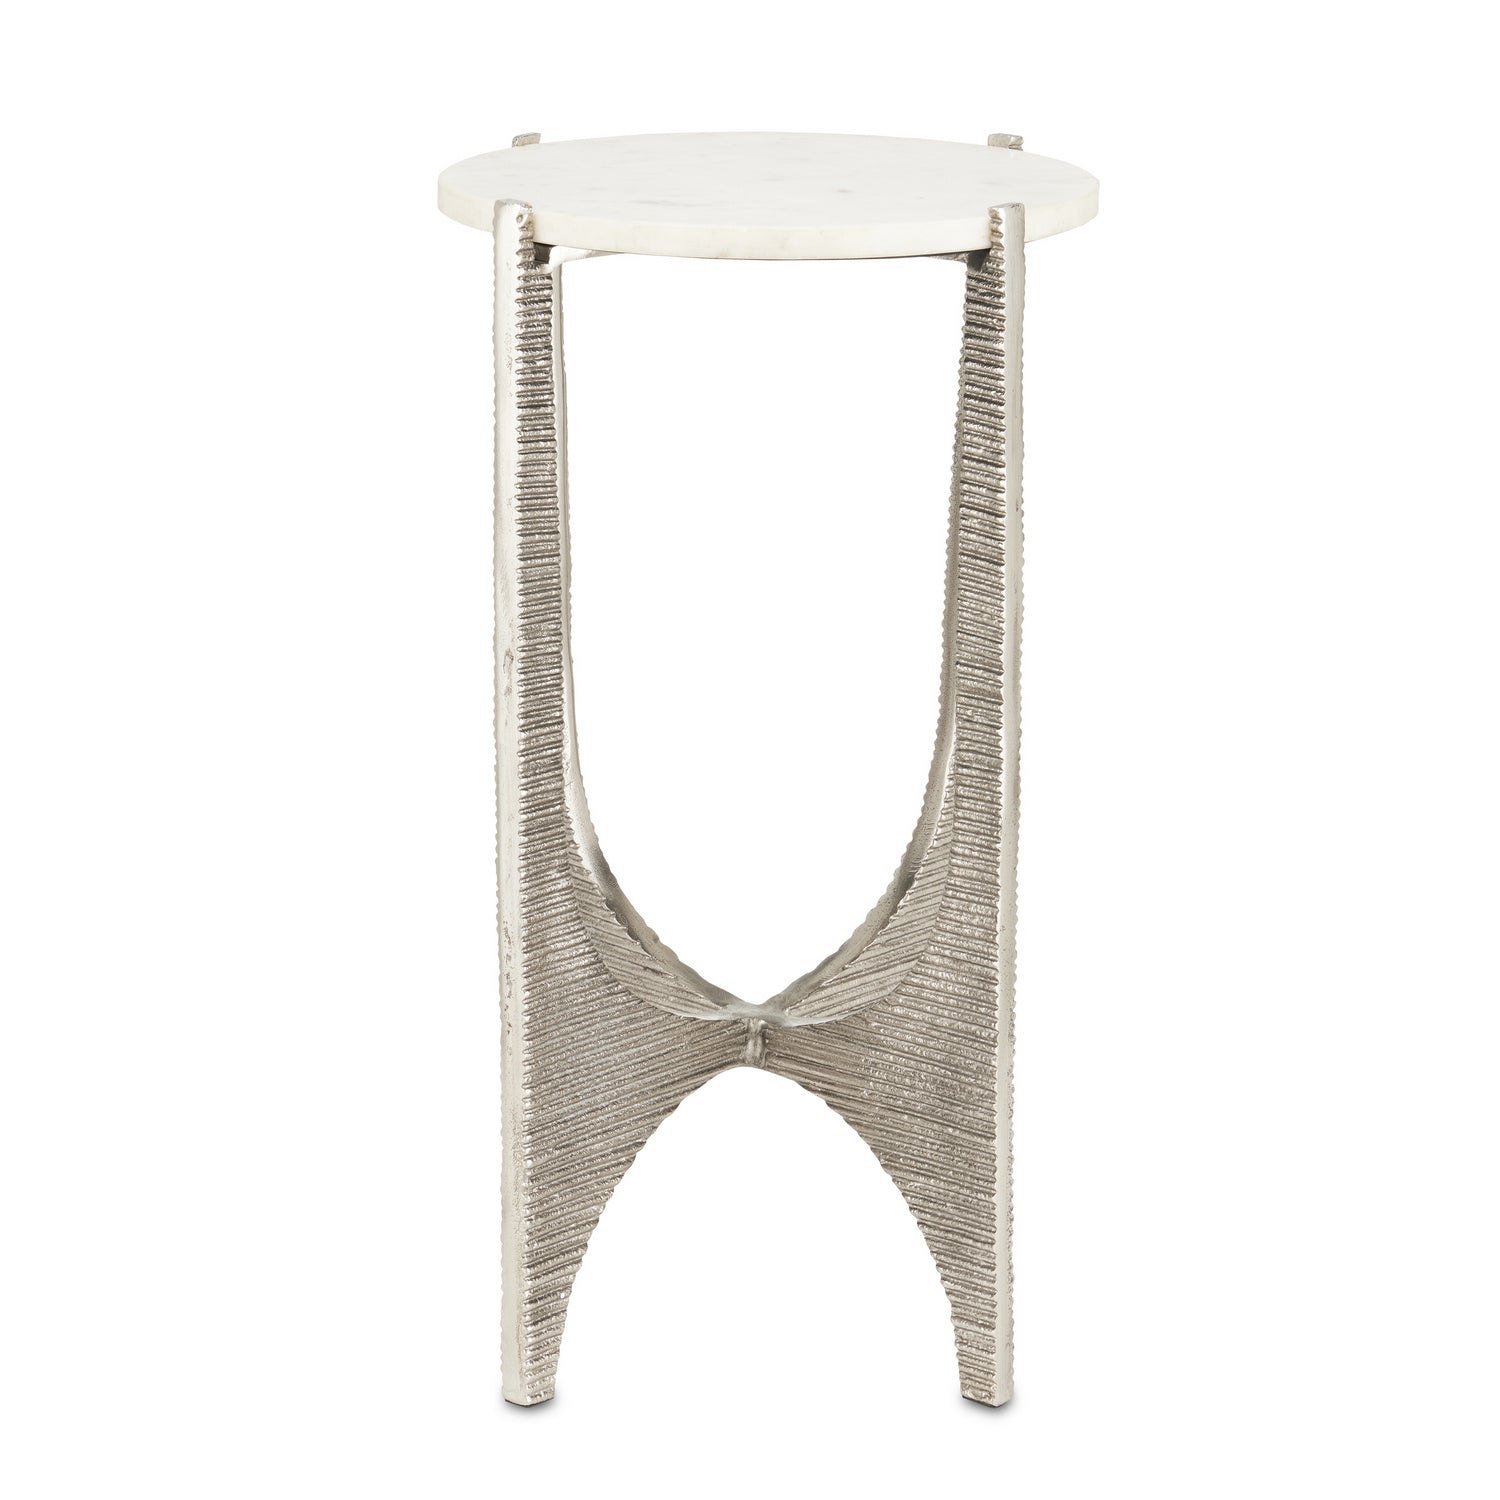 Accent Table from the Micha collection in Antique Nickel/White finish